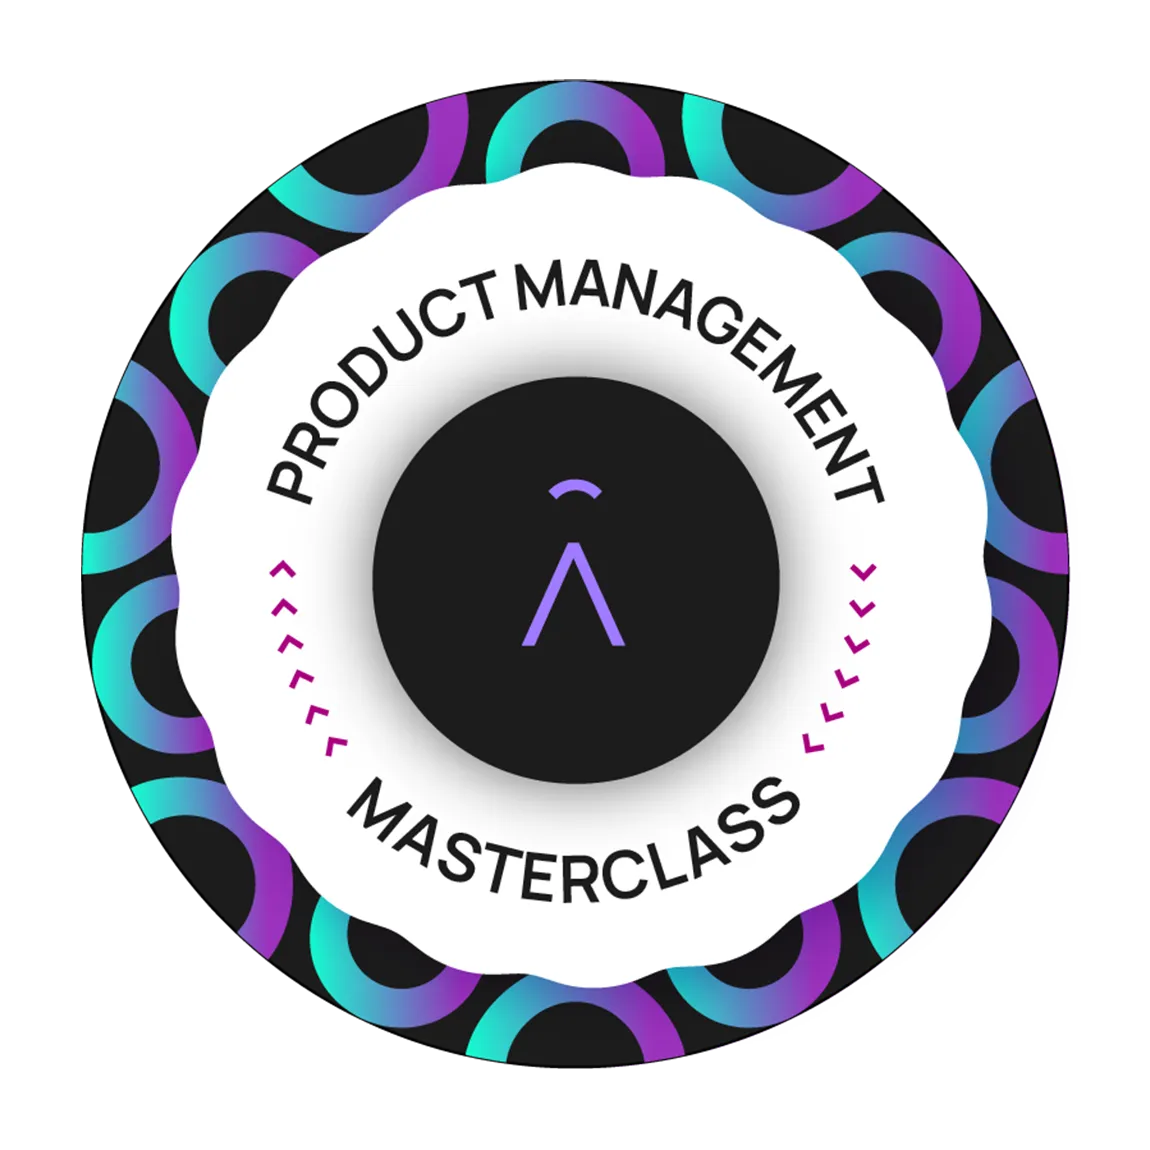 Become a Product Manager, without obstacles